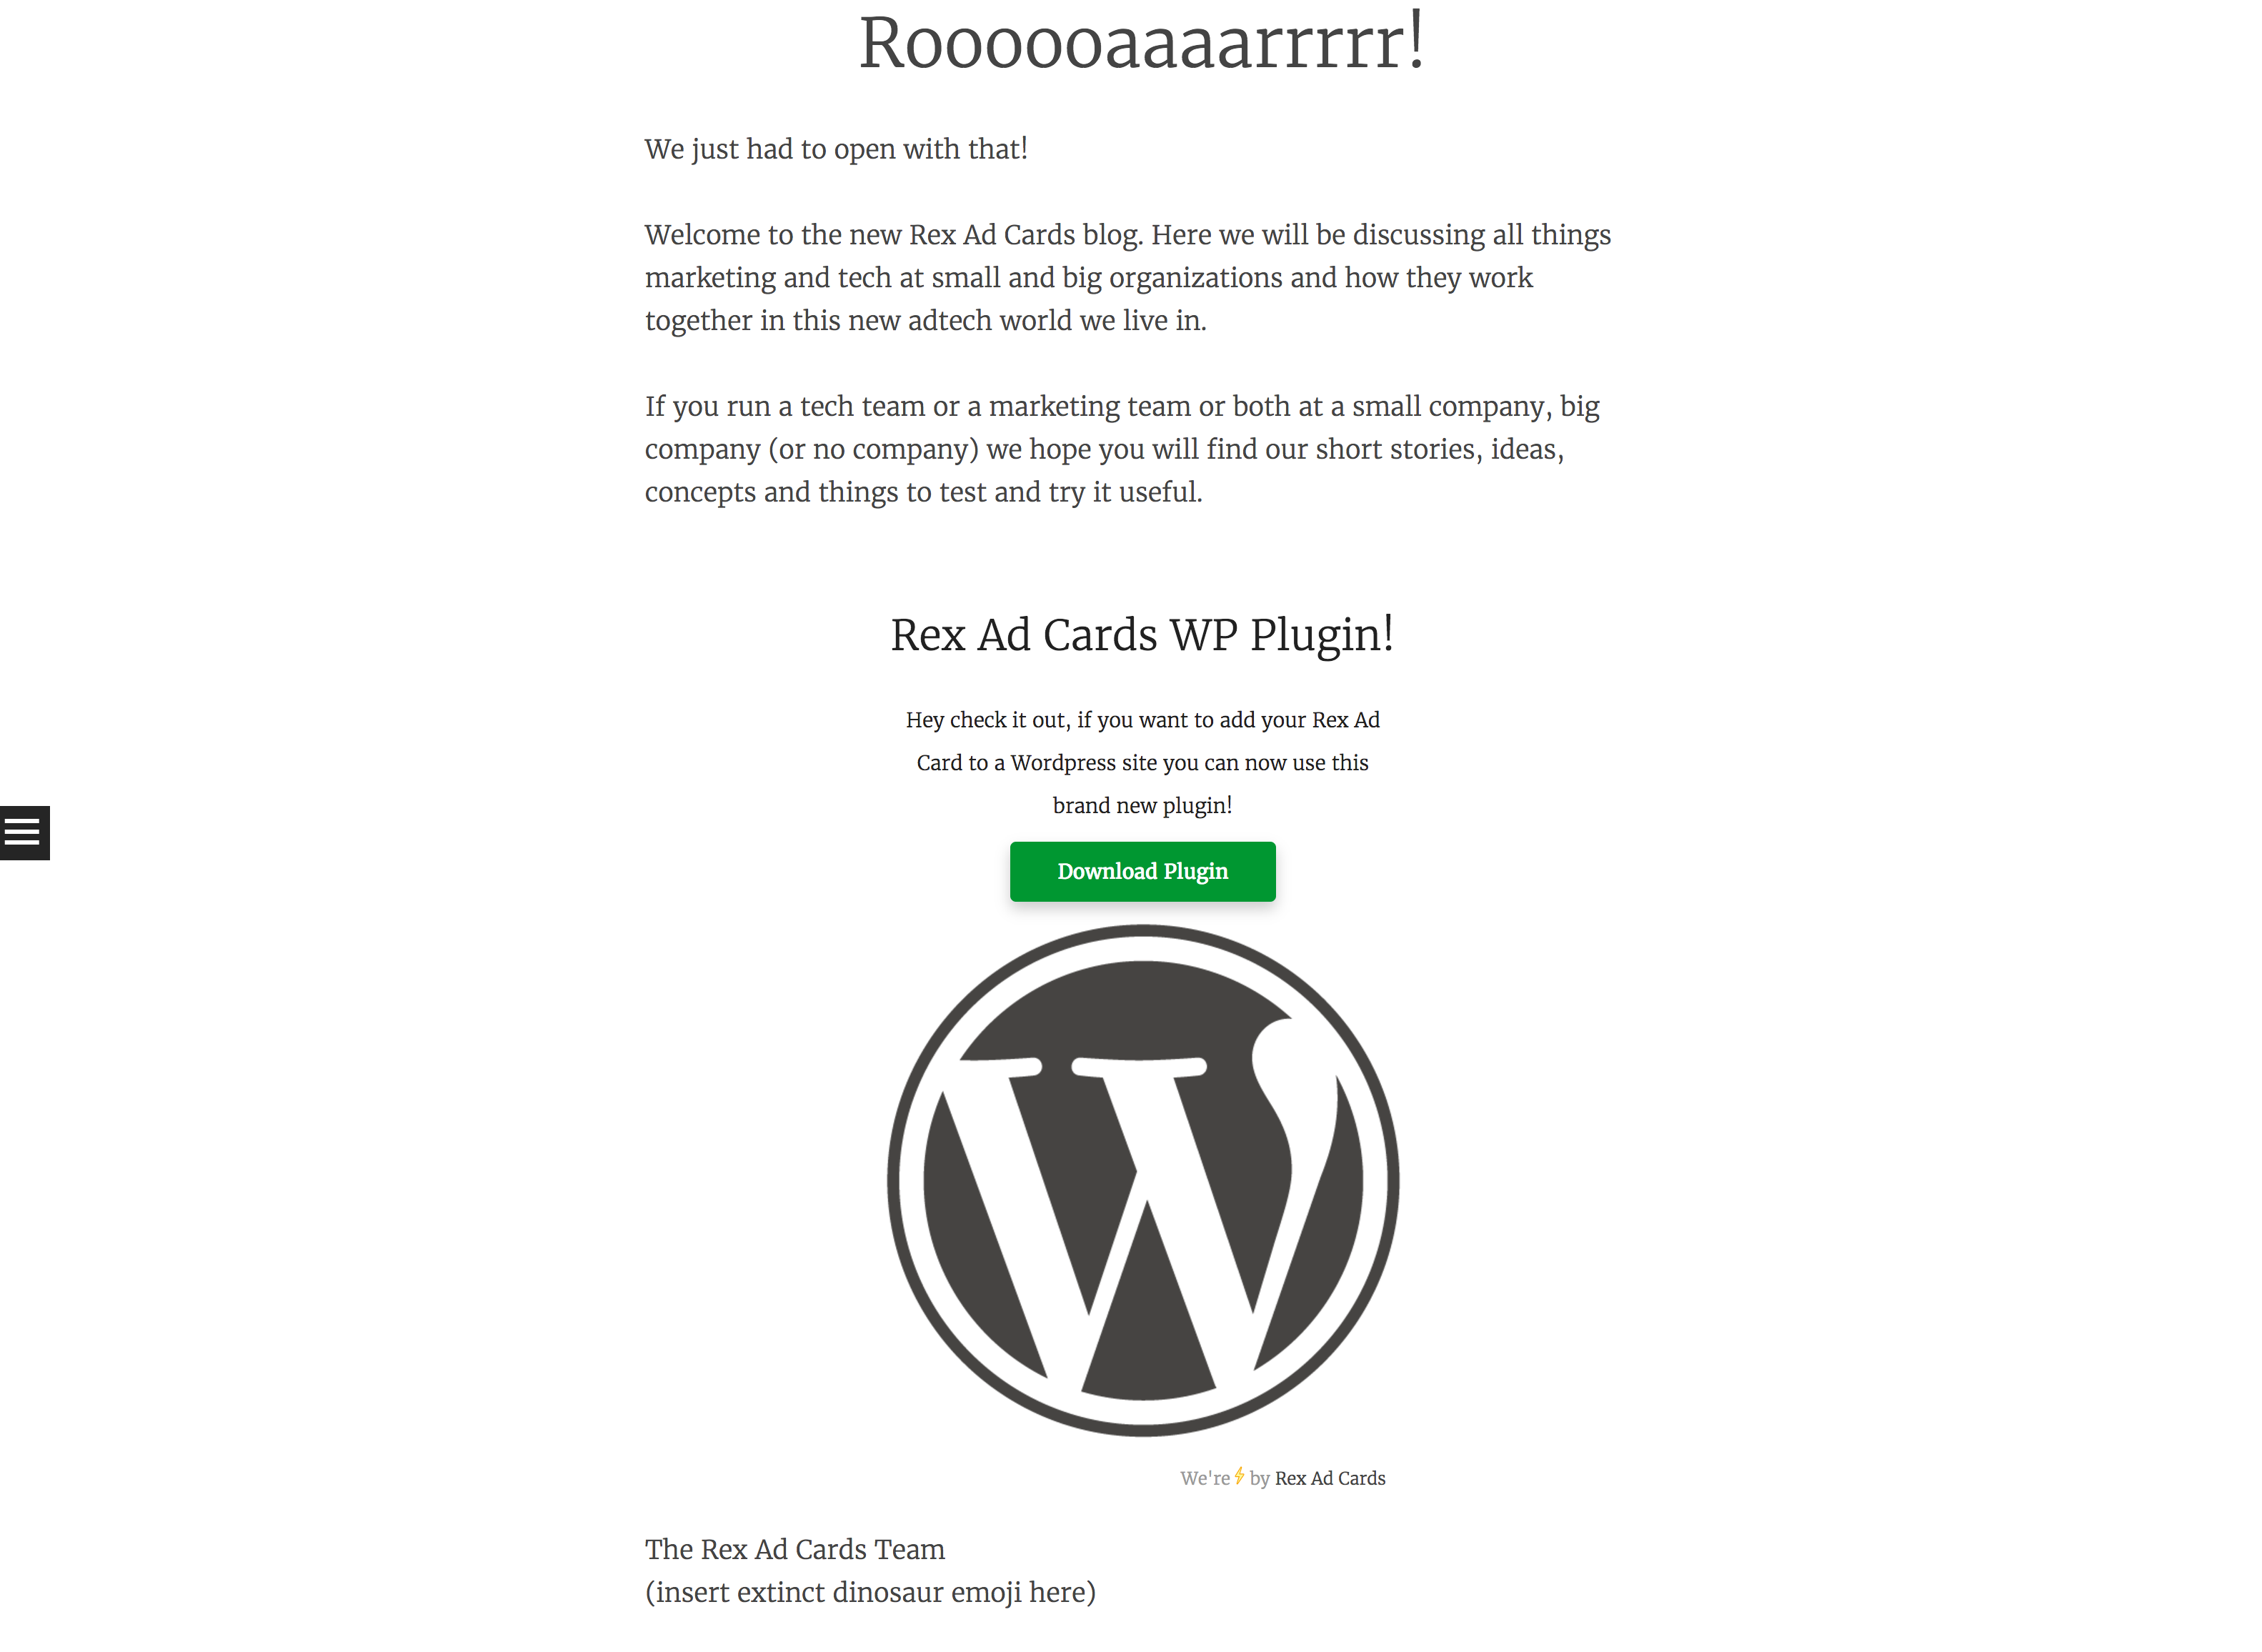 A Rex Ad Card displayed on the Wordpress site